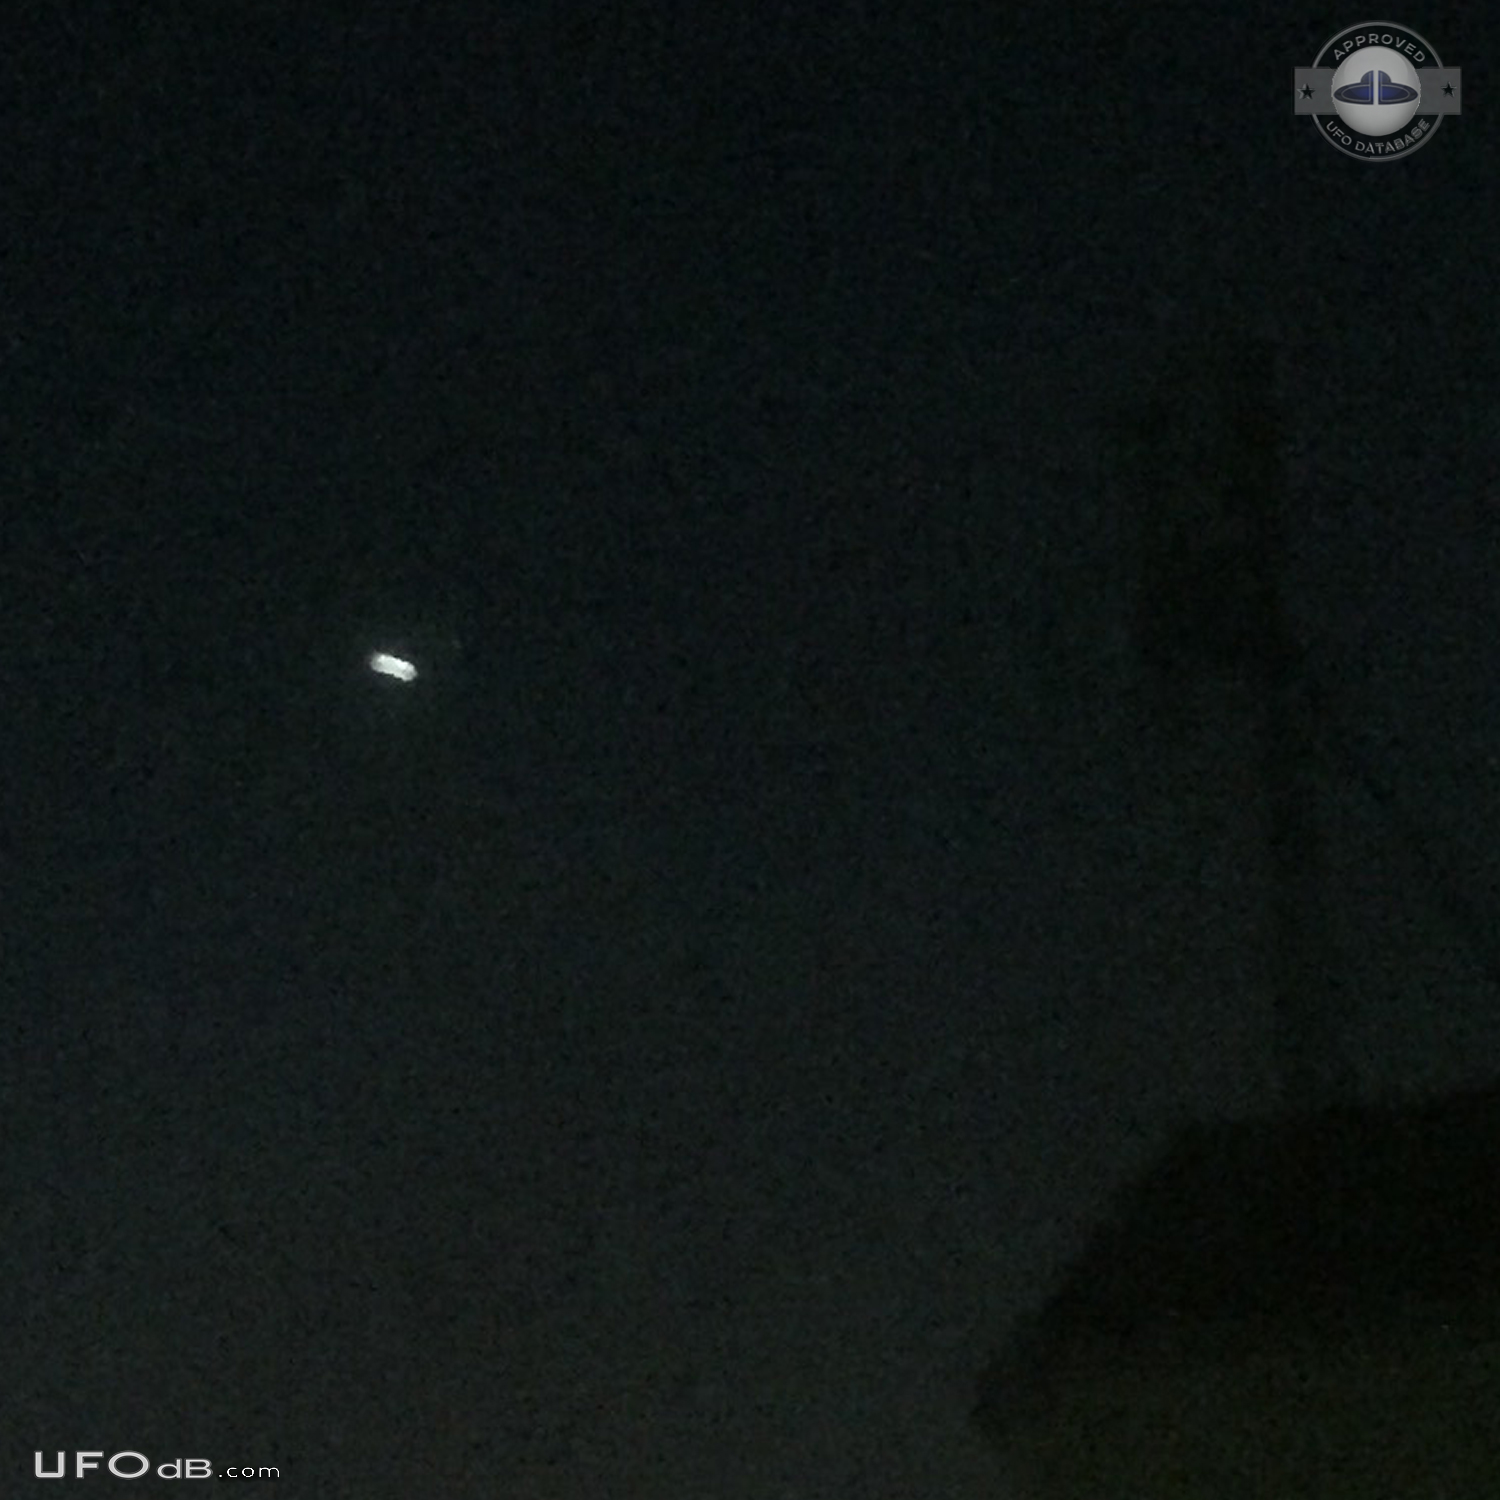 Very bright UFO seemed to have tentacles - Bangkok Thailand 2017 UFO Picture #805-5